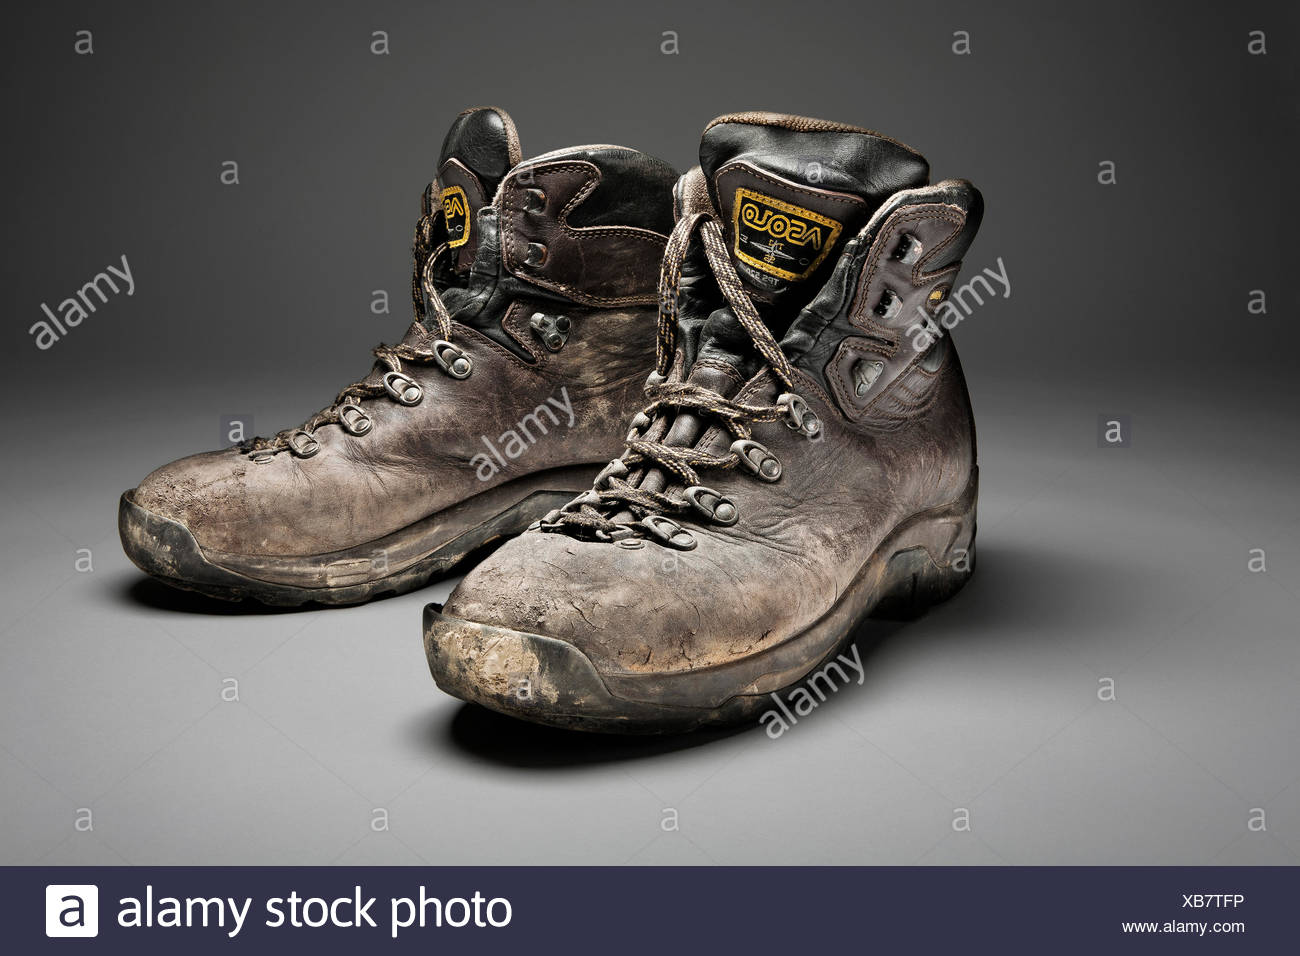 well worn boots